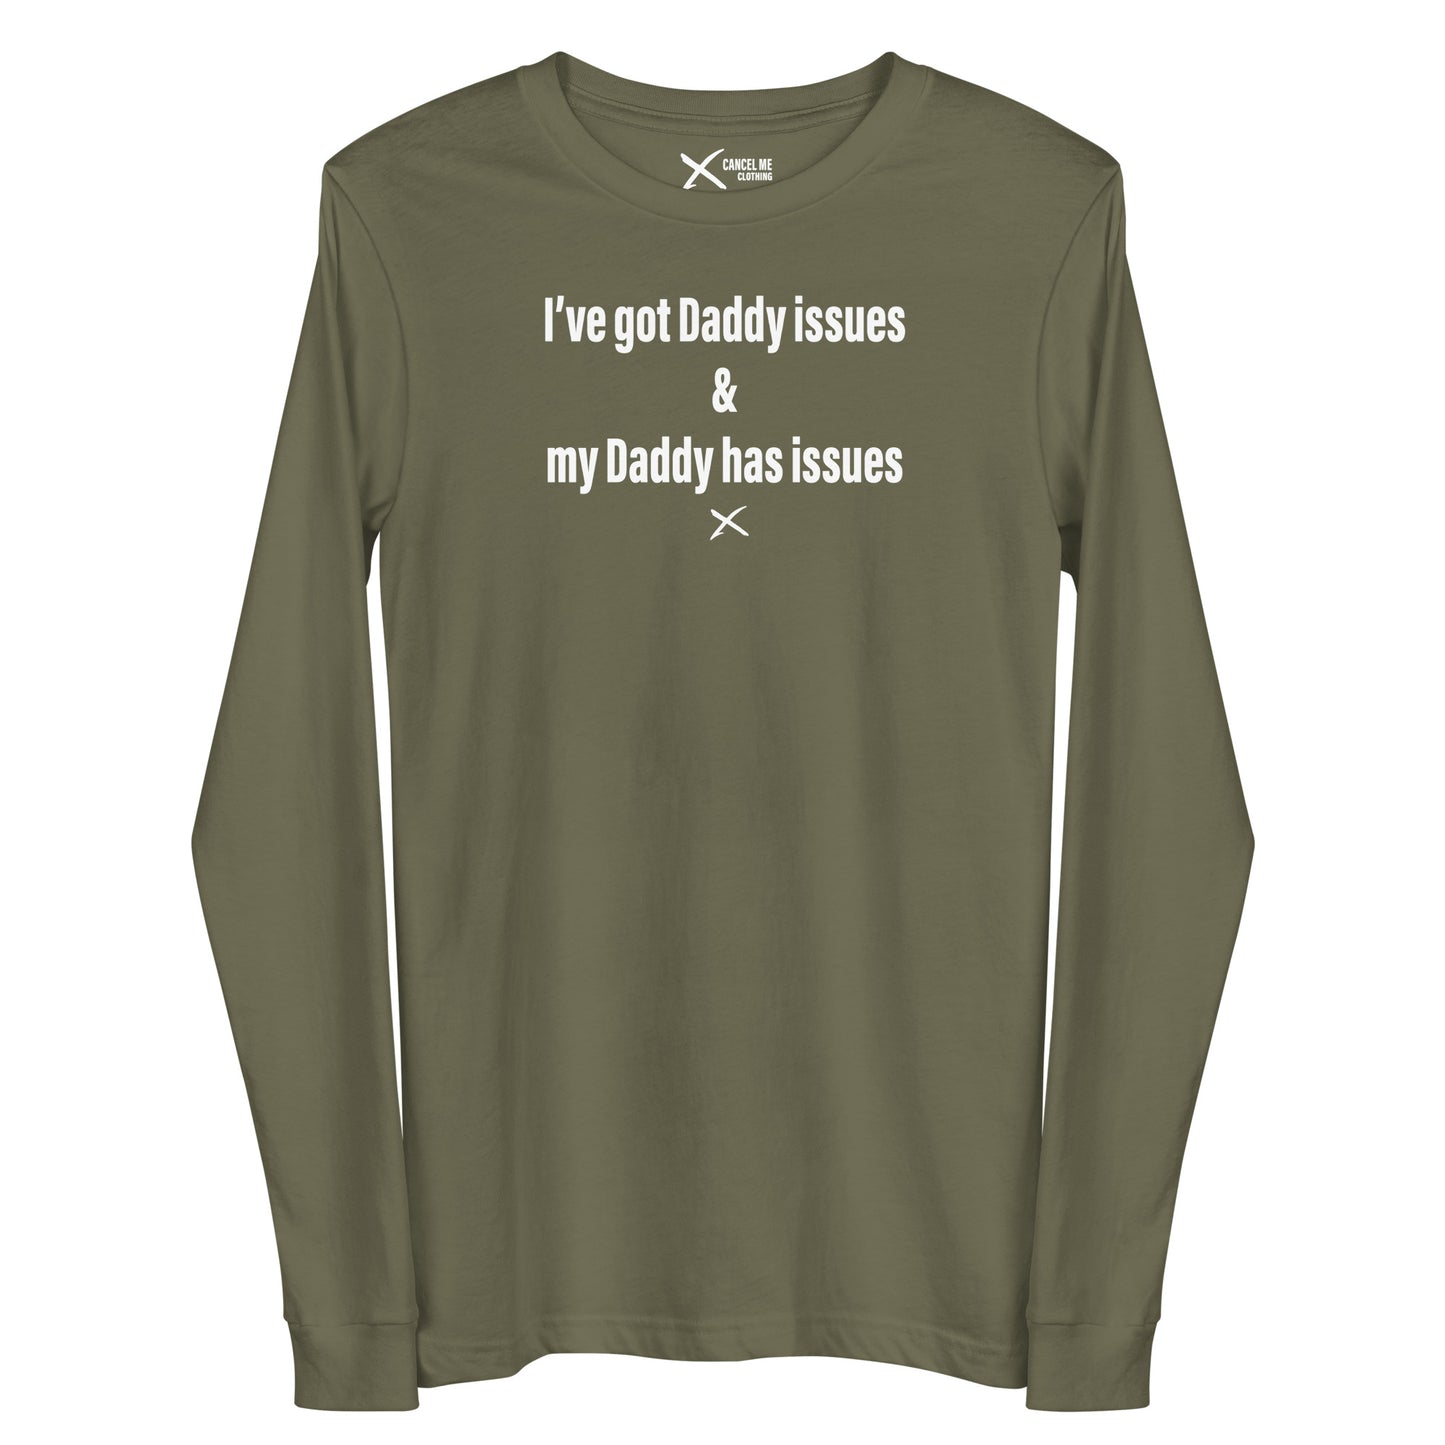 I've got Daddy issues & my Daddy has issues - Longsleeve